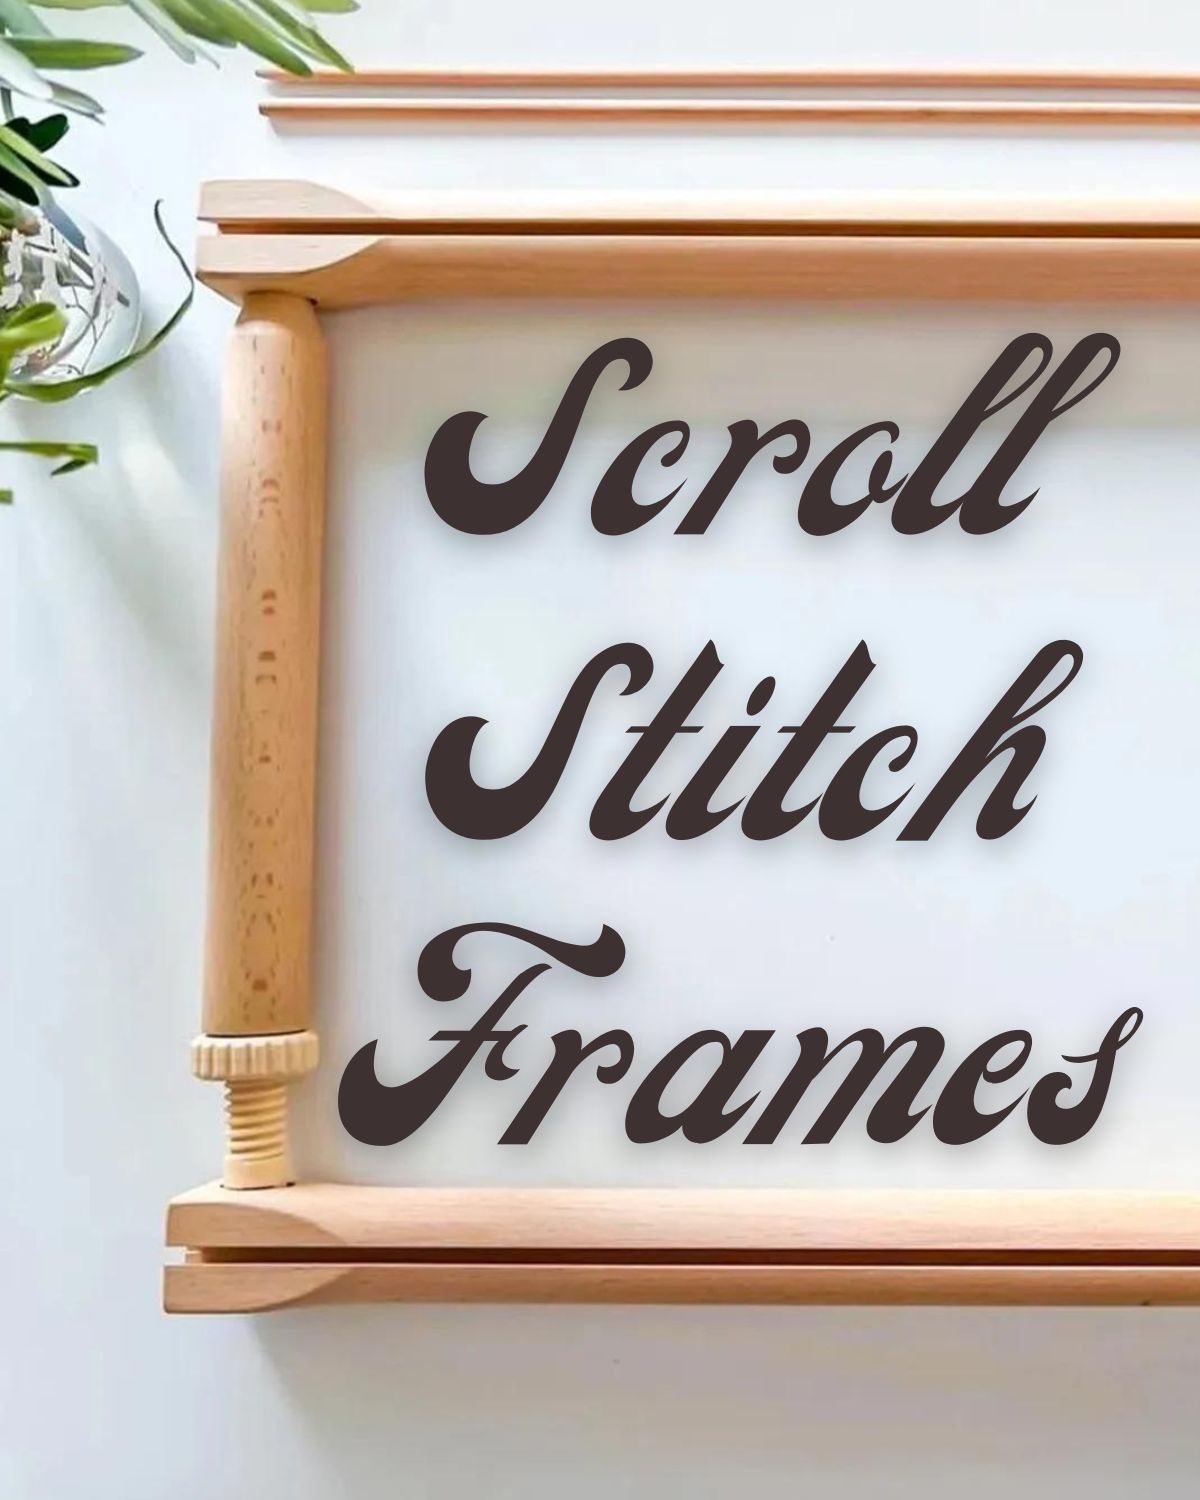 Empty Embroidery frame